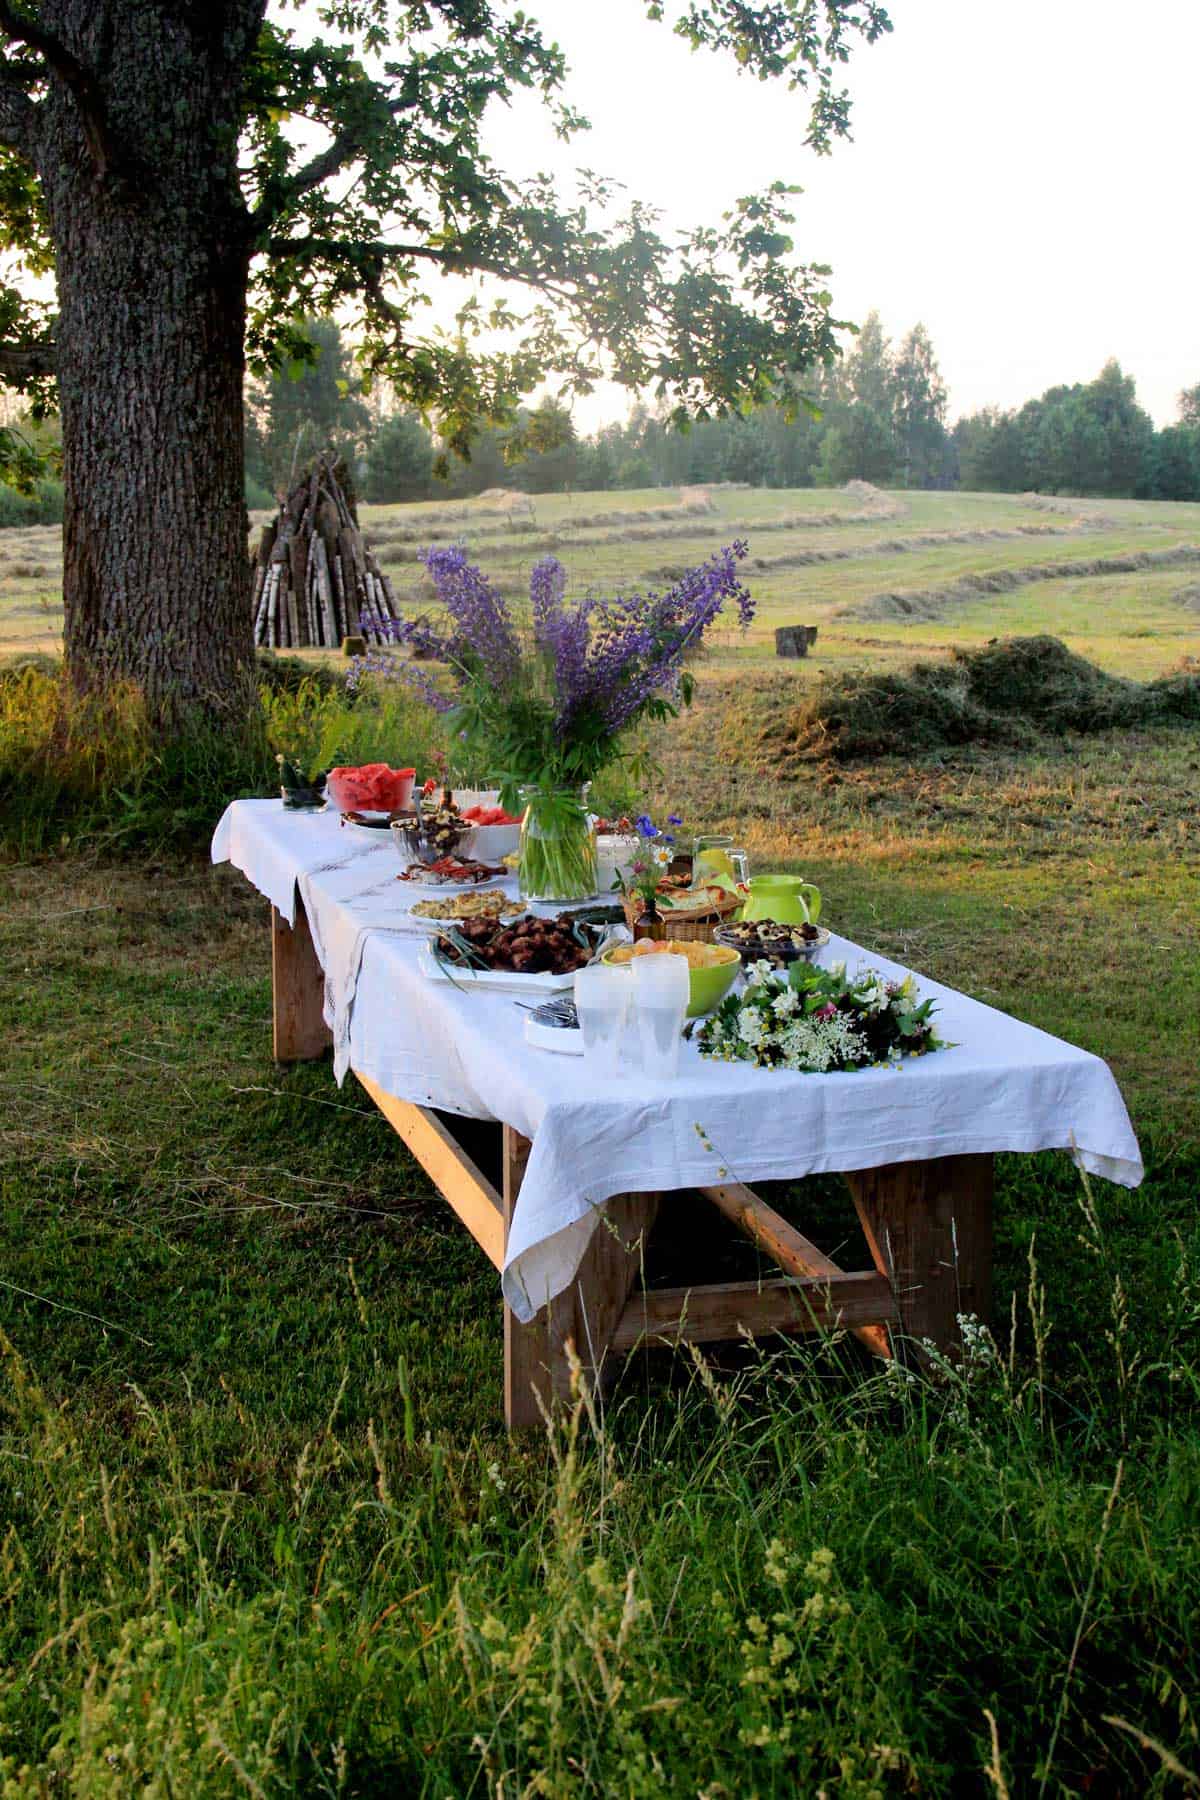 A picnic table in a field with a white table cloth and a large vase of purple flowers in the center.